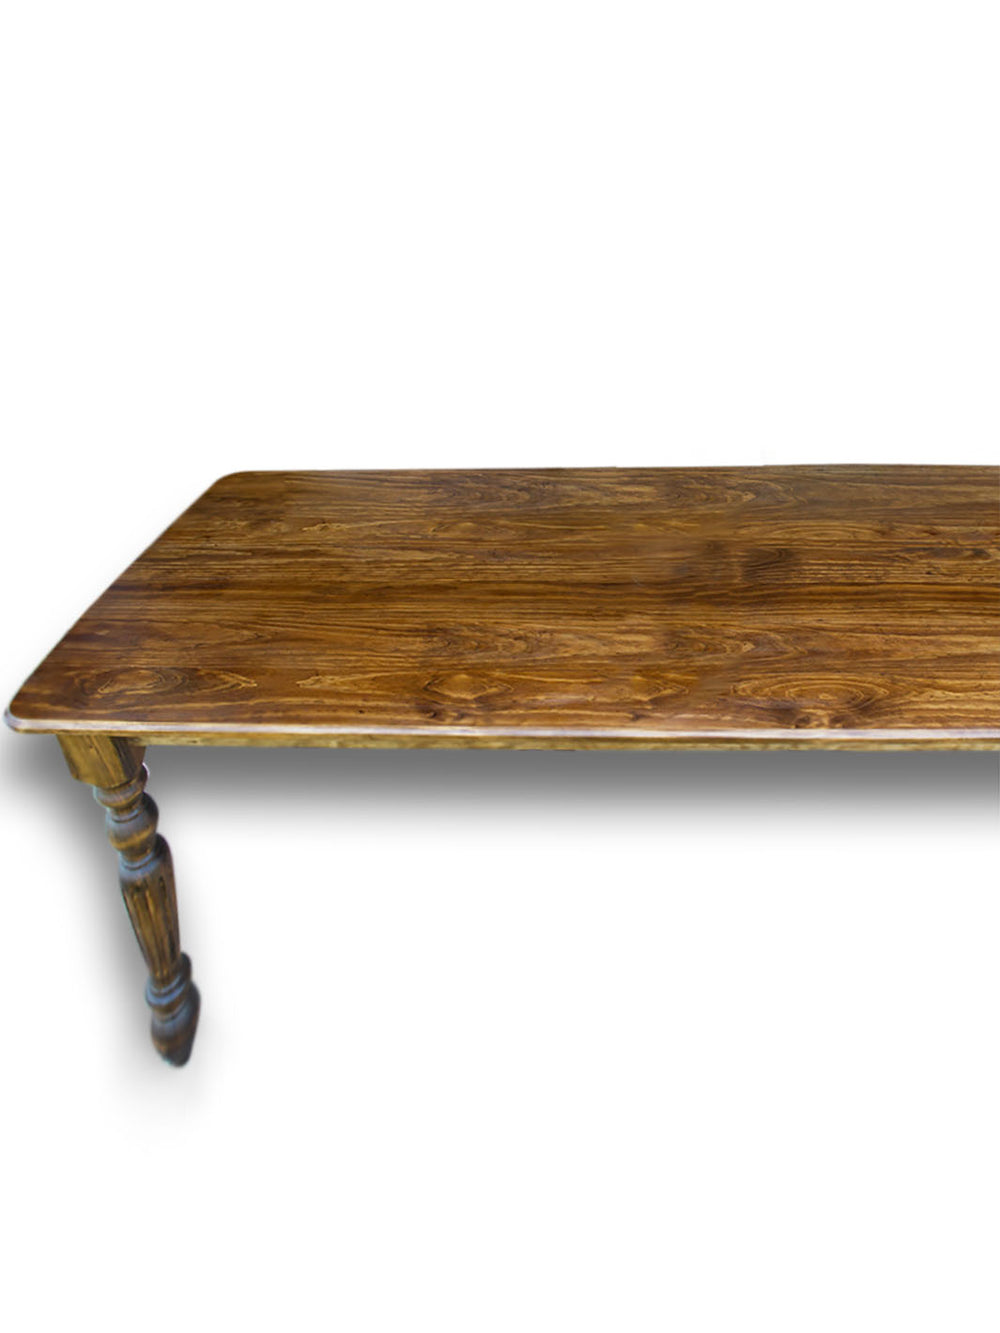 Farmhouse Dining Table with Stained Top and Turned Legs Earthly Comfort Dining Tables 979-1